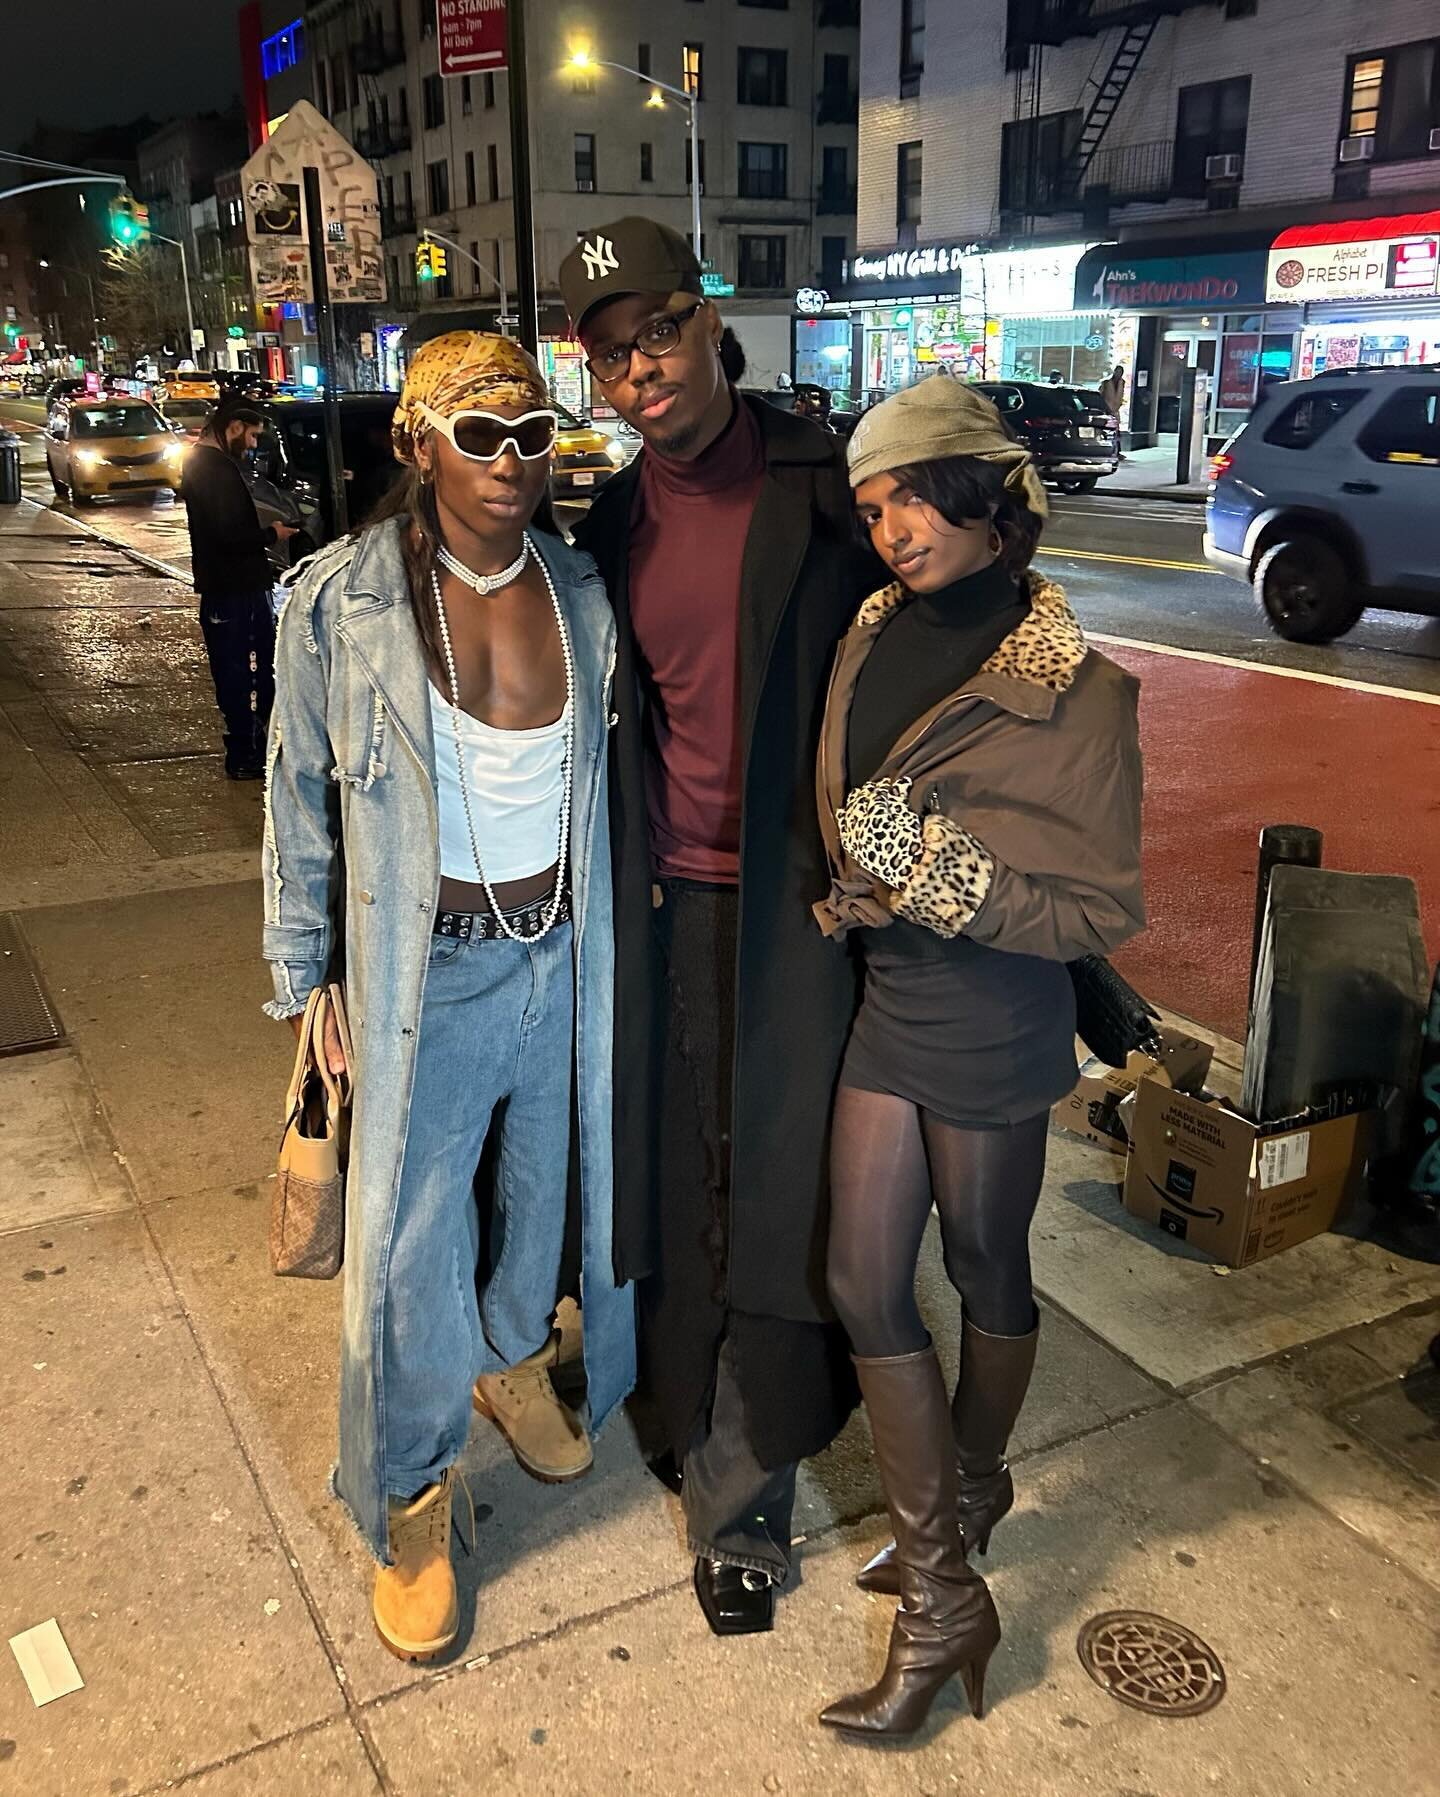 they stare cause they know i&rsquo;m the &hellip;
🐆 @aliyahsinterlude 

NYFW you&rsquo;ve been toooo good to me. until next time ;) 

#nyfw #nyfw24 #aliyahcore #aliyahsinterlude #launchevent #brooklyn #manhattan #newyork #model #queermodel #nonbinar